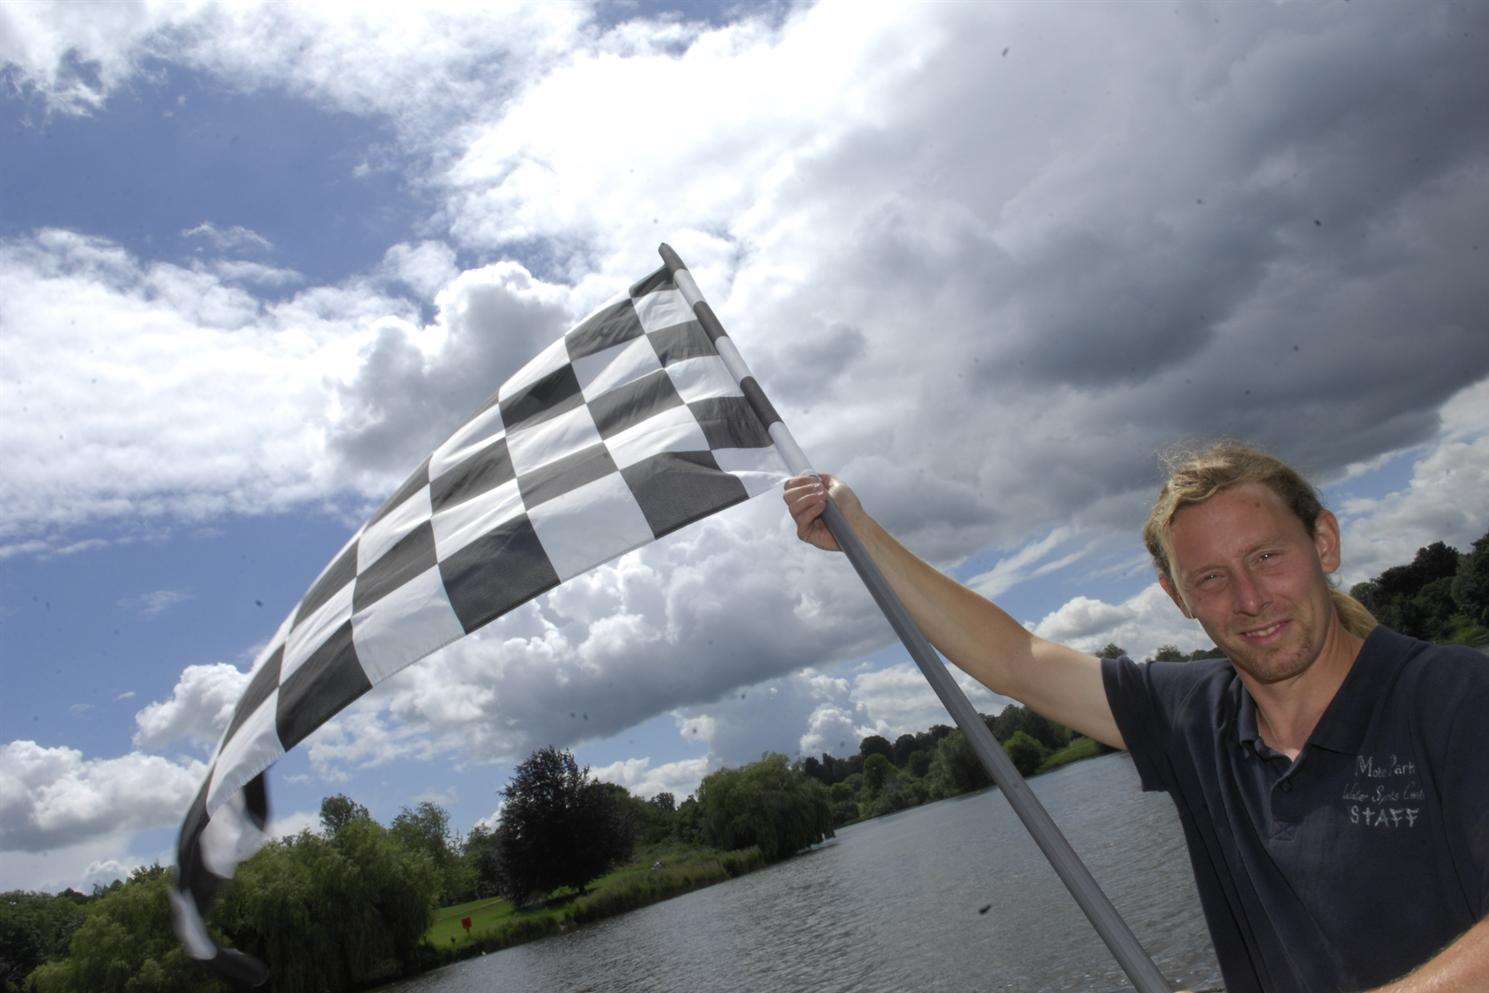 Stuart Clarke of Mote Park Water Sports Centre waves the starter flag for last year's KM Dragon Boat Race. Mote Park once again provides the setting for this event which is a highlight of the summer.